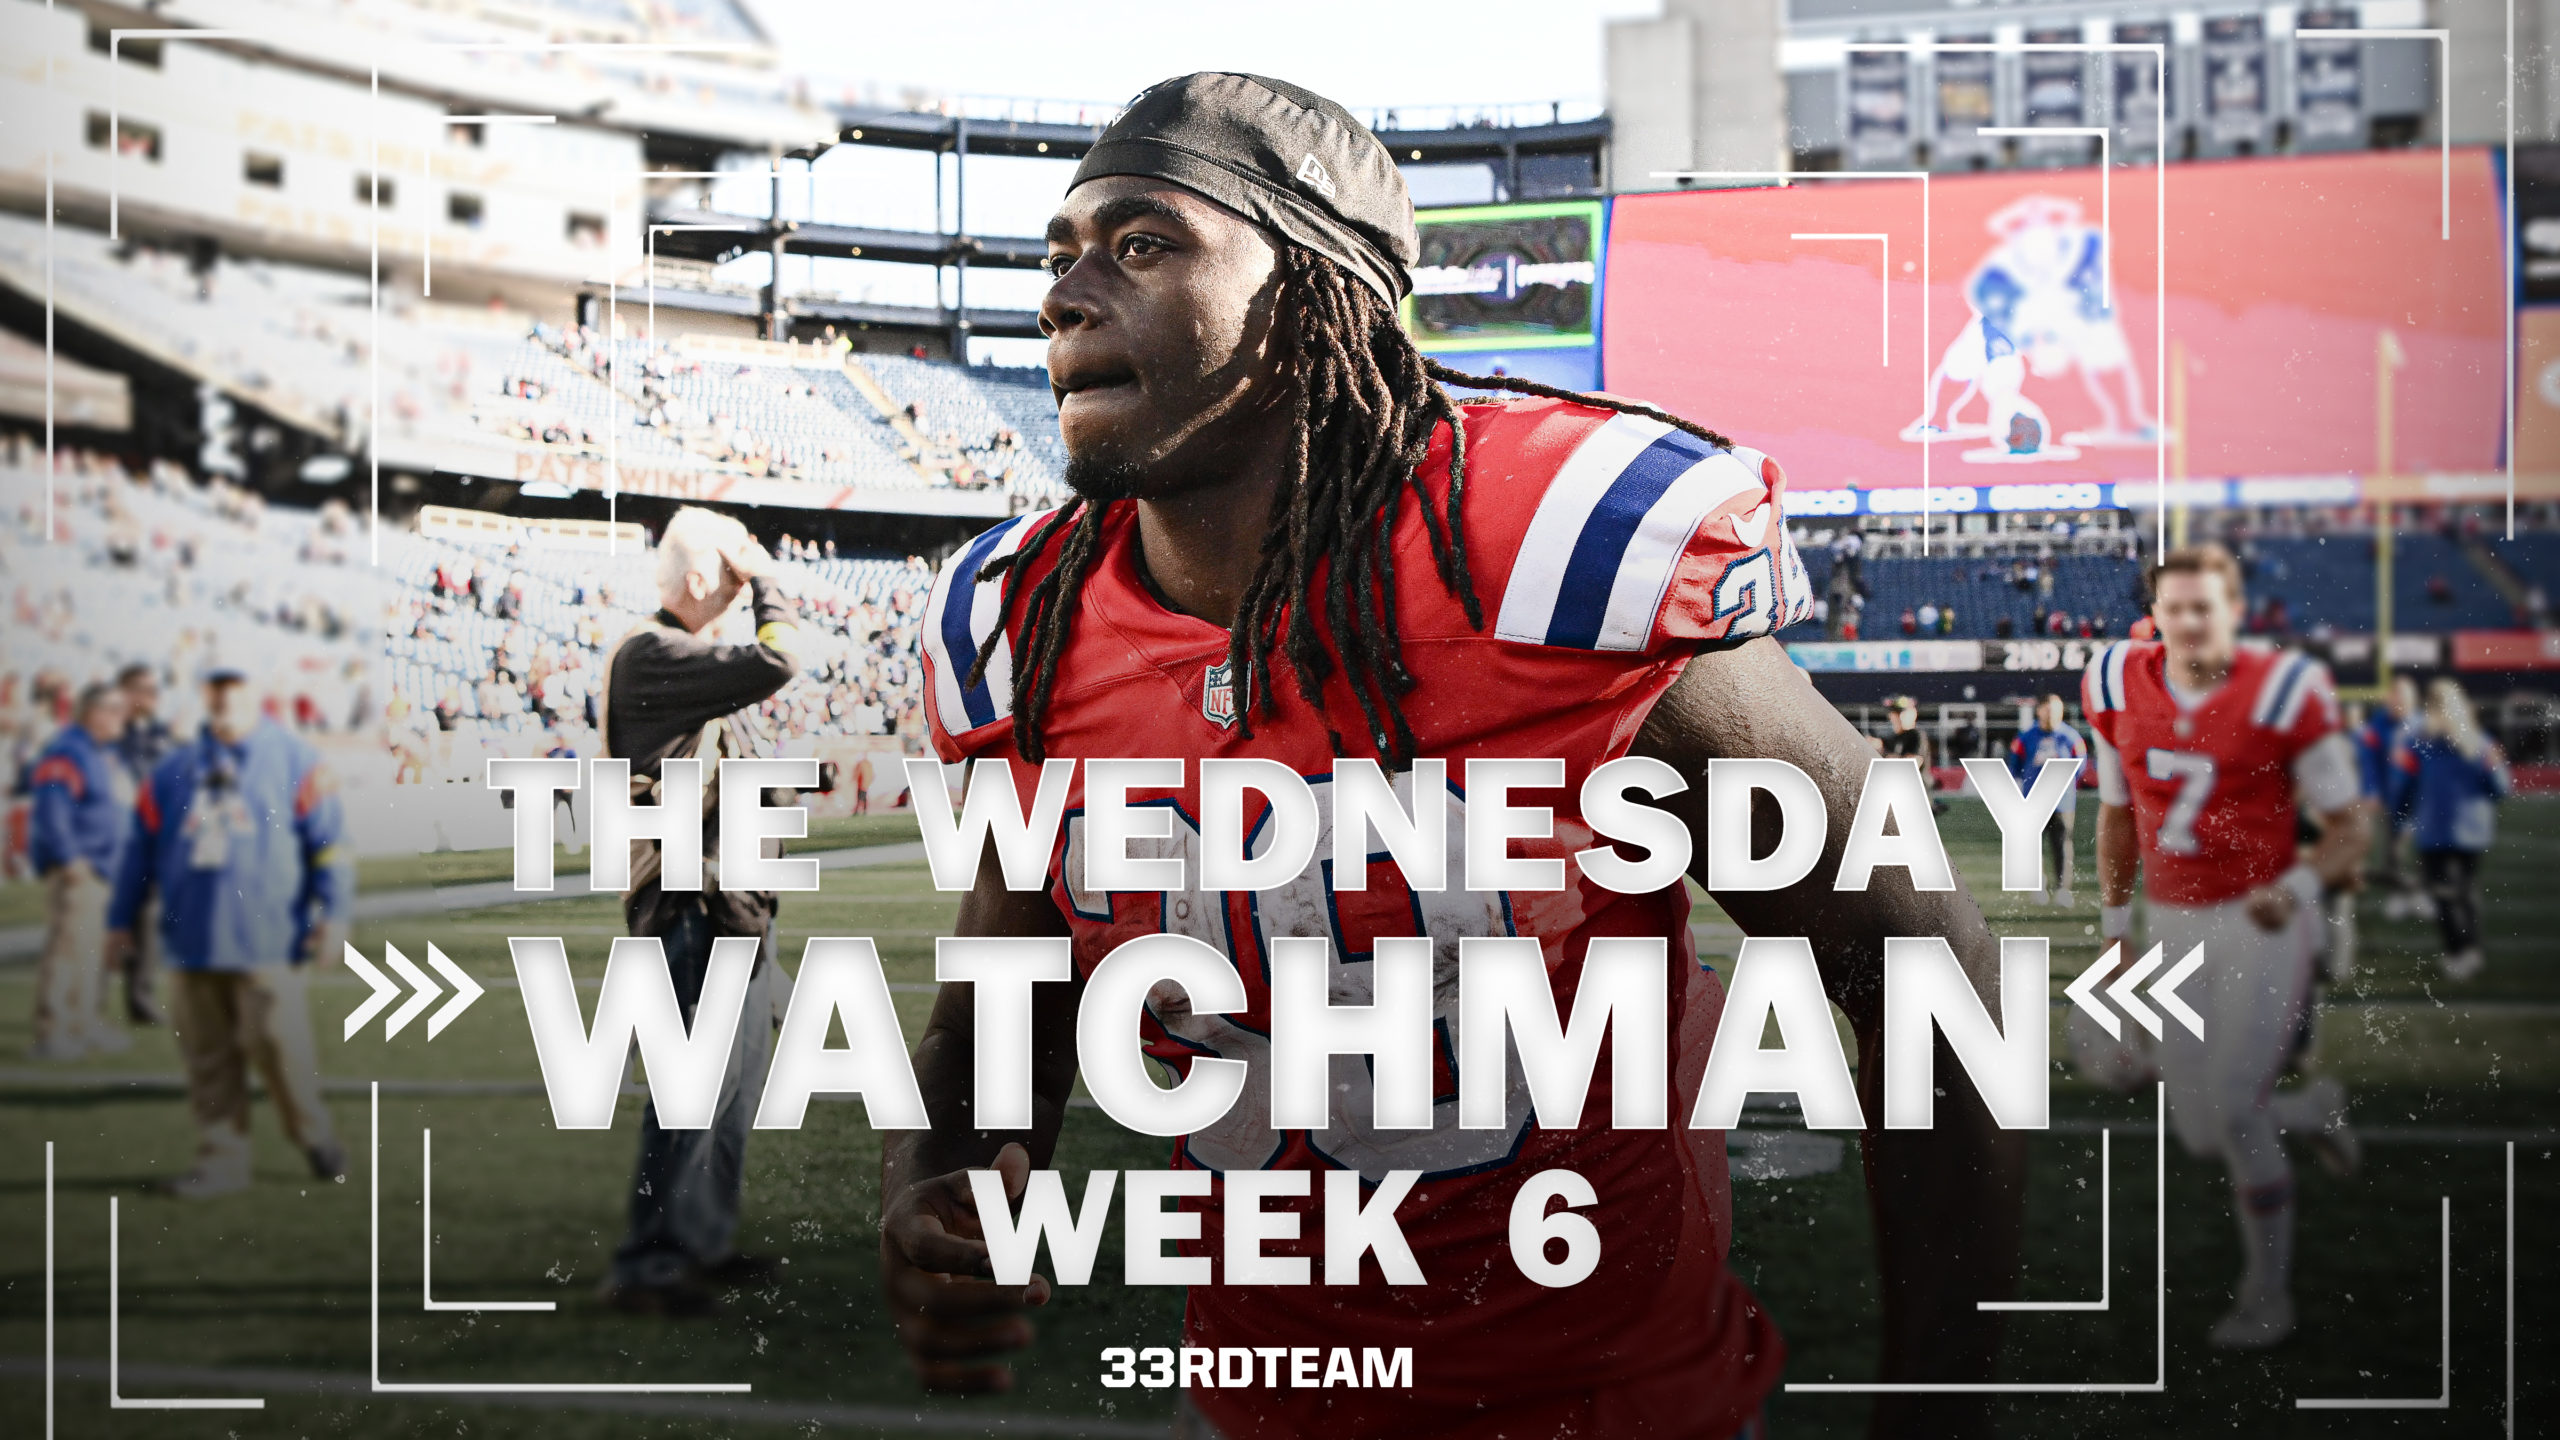 The Wednesday Watchman: NFL Week 6 Betting, DFS and Fantasy Information to Know